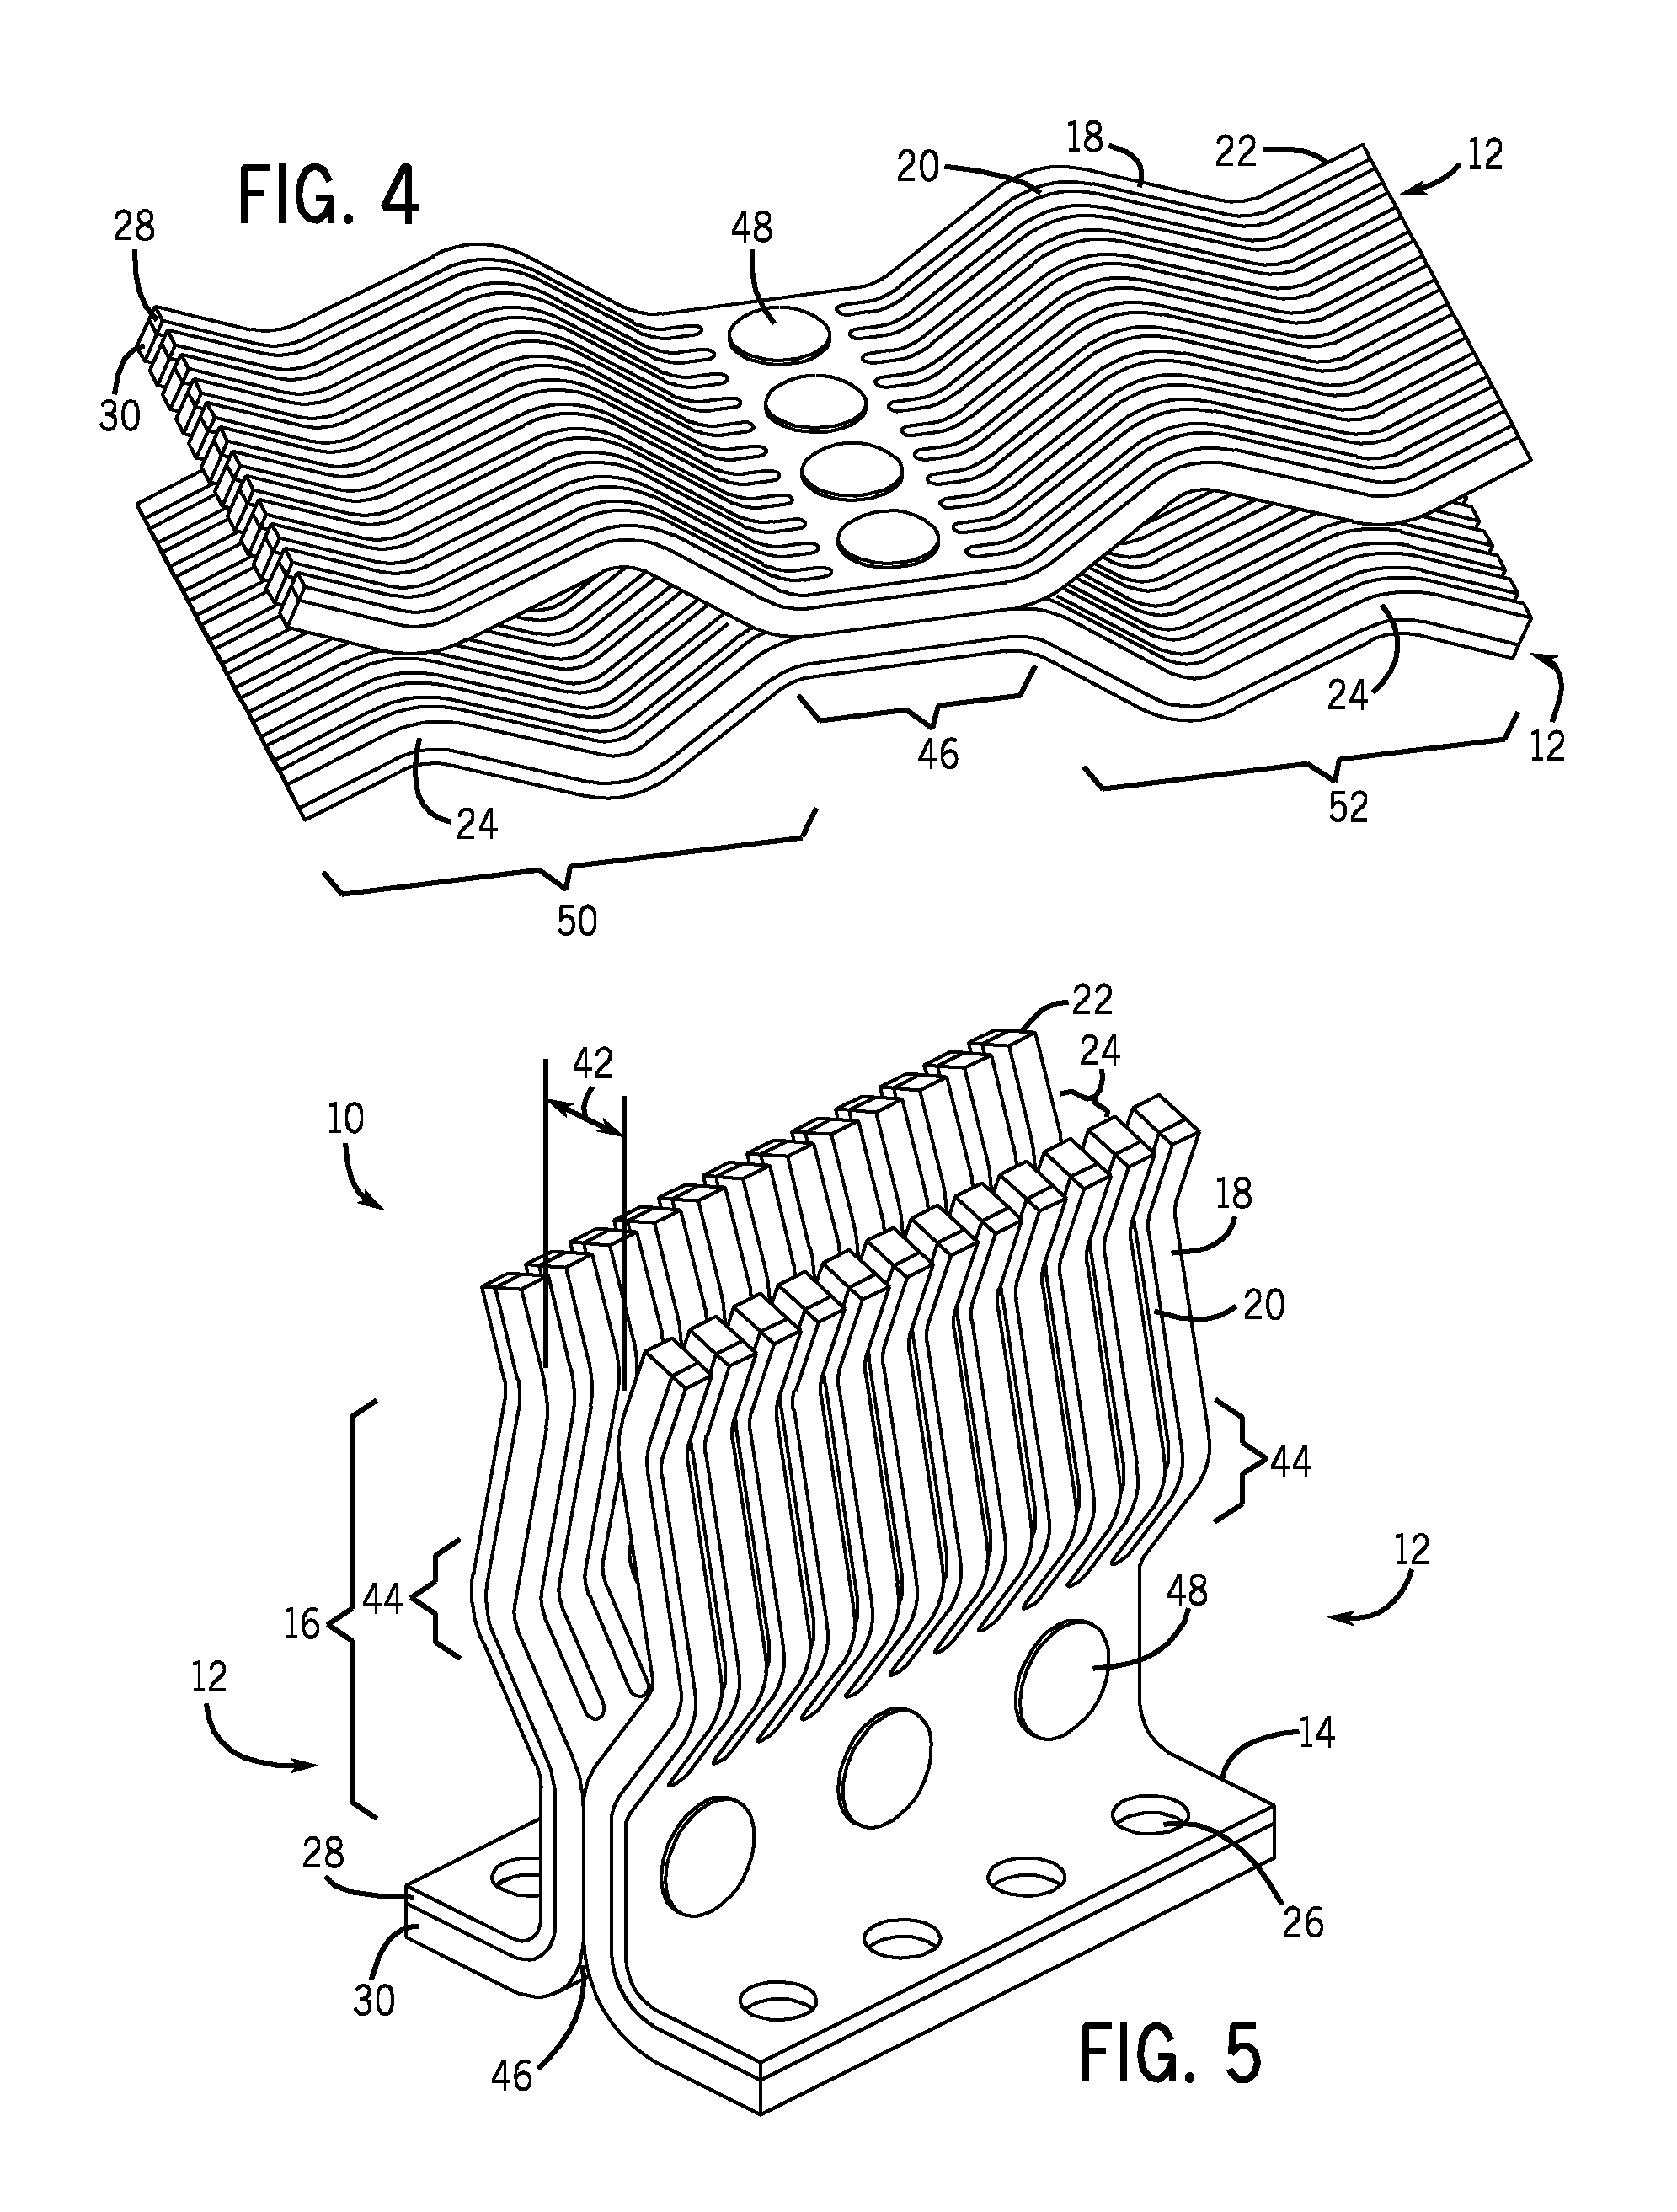 Electrical power stab system and method for making same